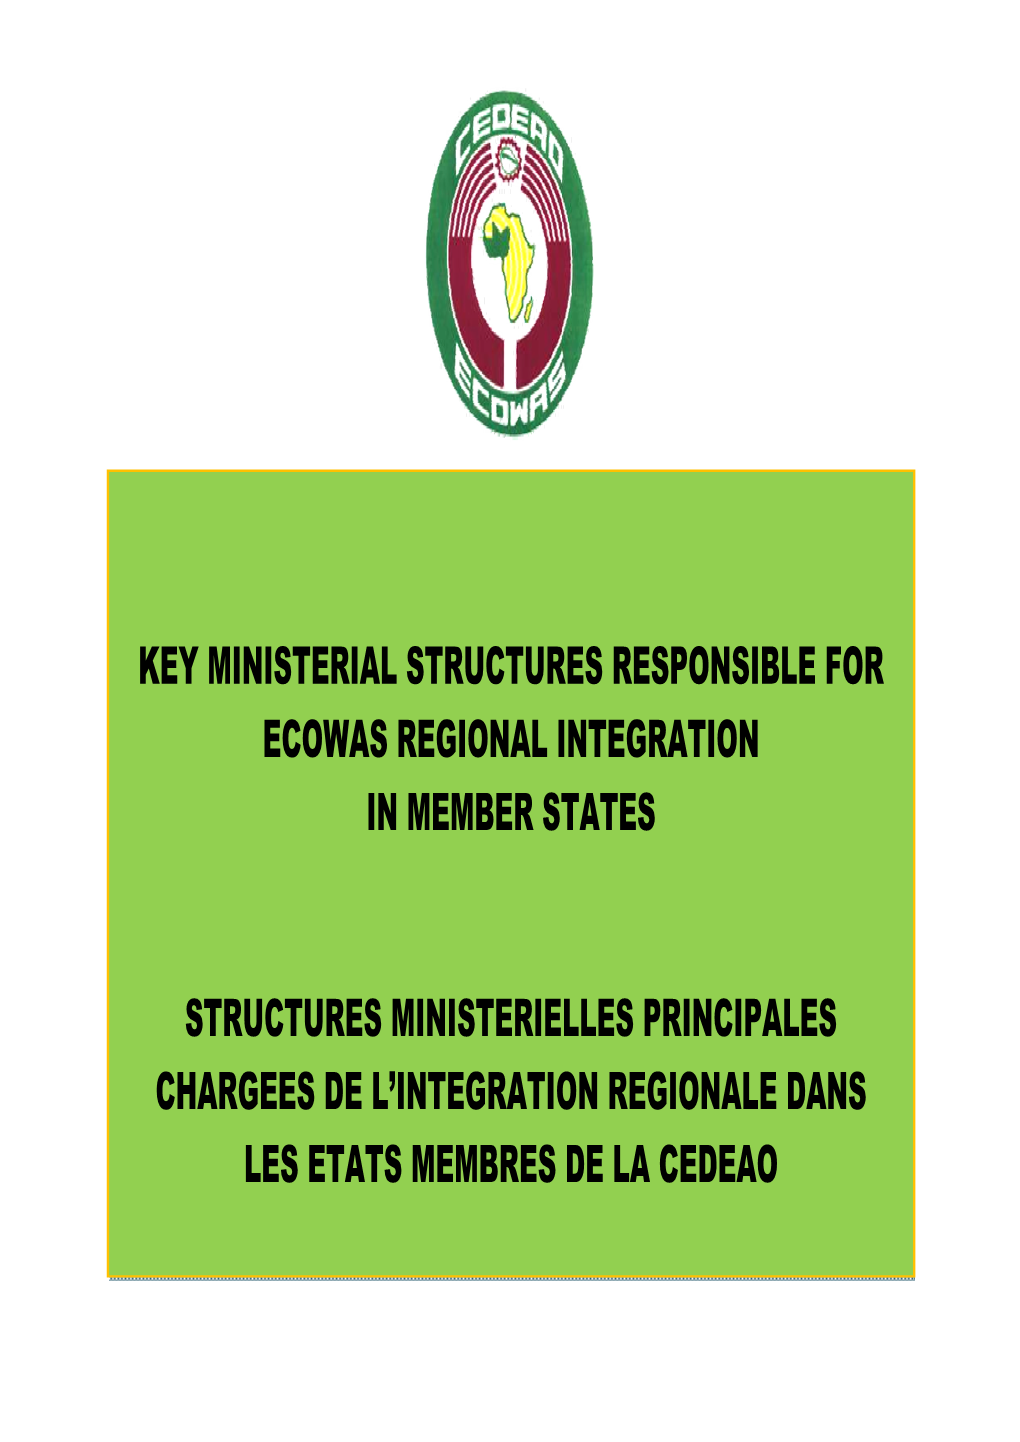 Key Ministerial Structures Responsible for Ecowas